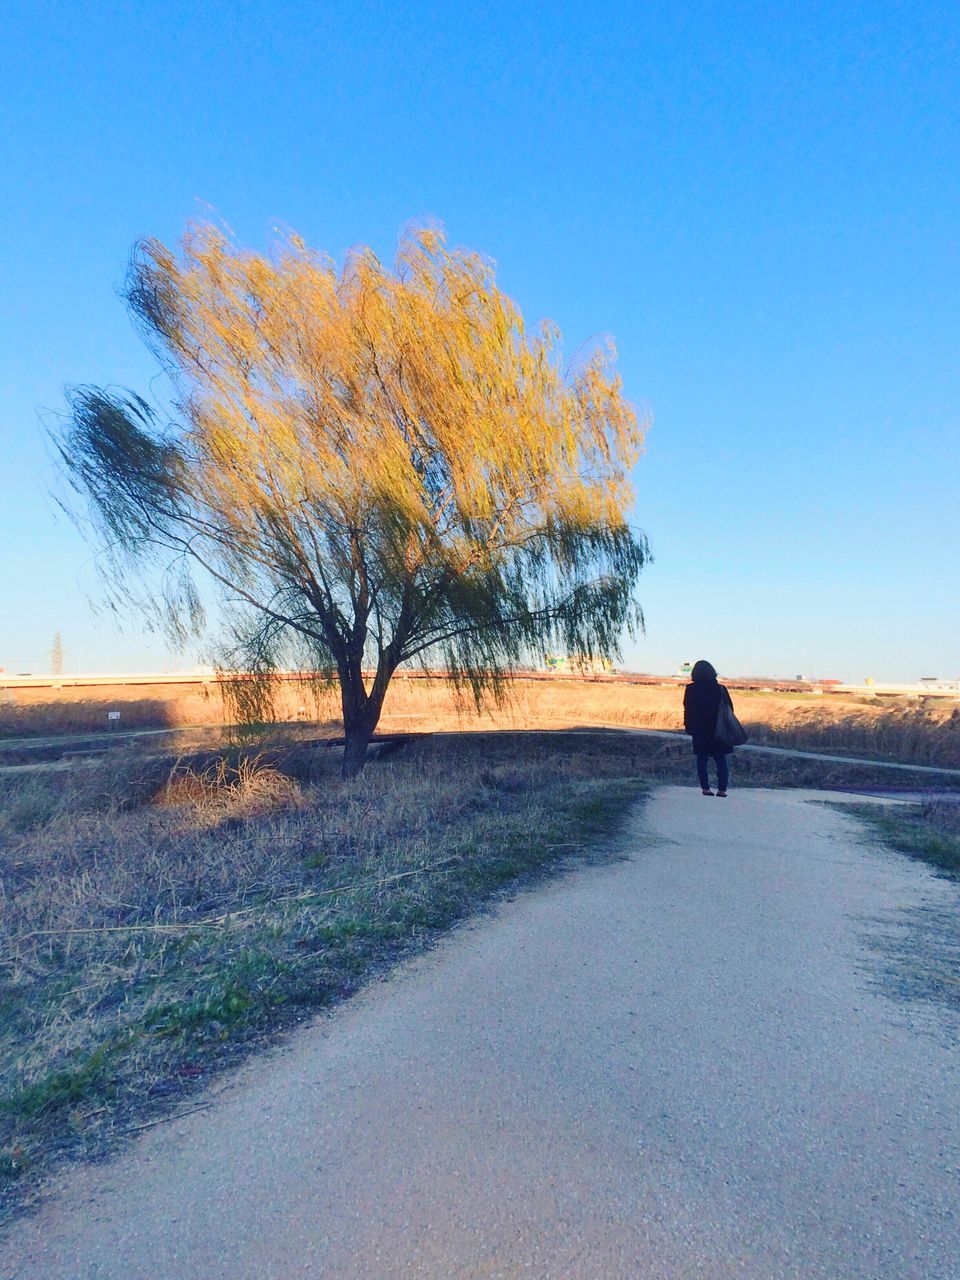 clear sky, tree, road, the way forward, copy space, tranquility, tranquil scene, landscape, field, country road, bare tree, nature, walking, transportation, beauty in nature, blue, full length, rear view